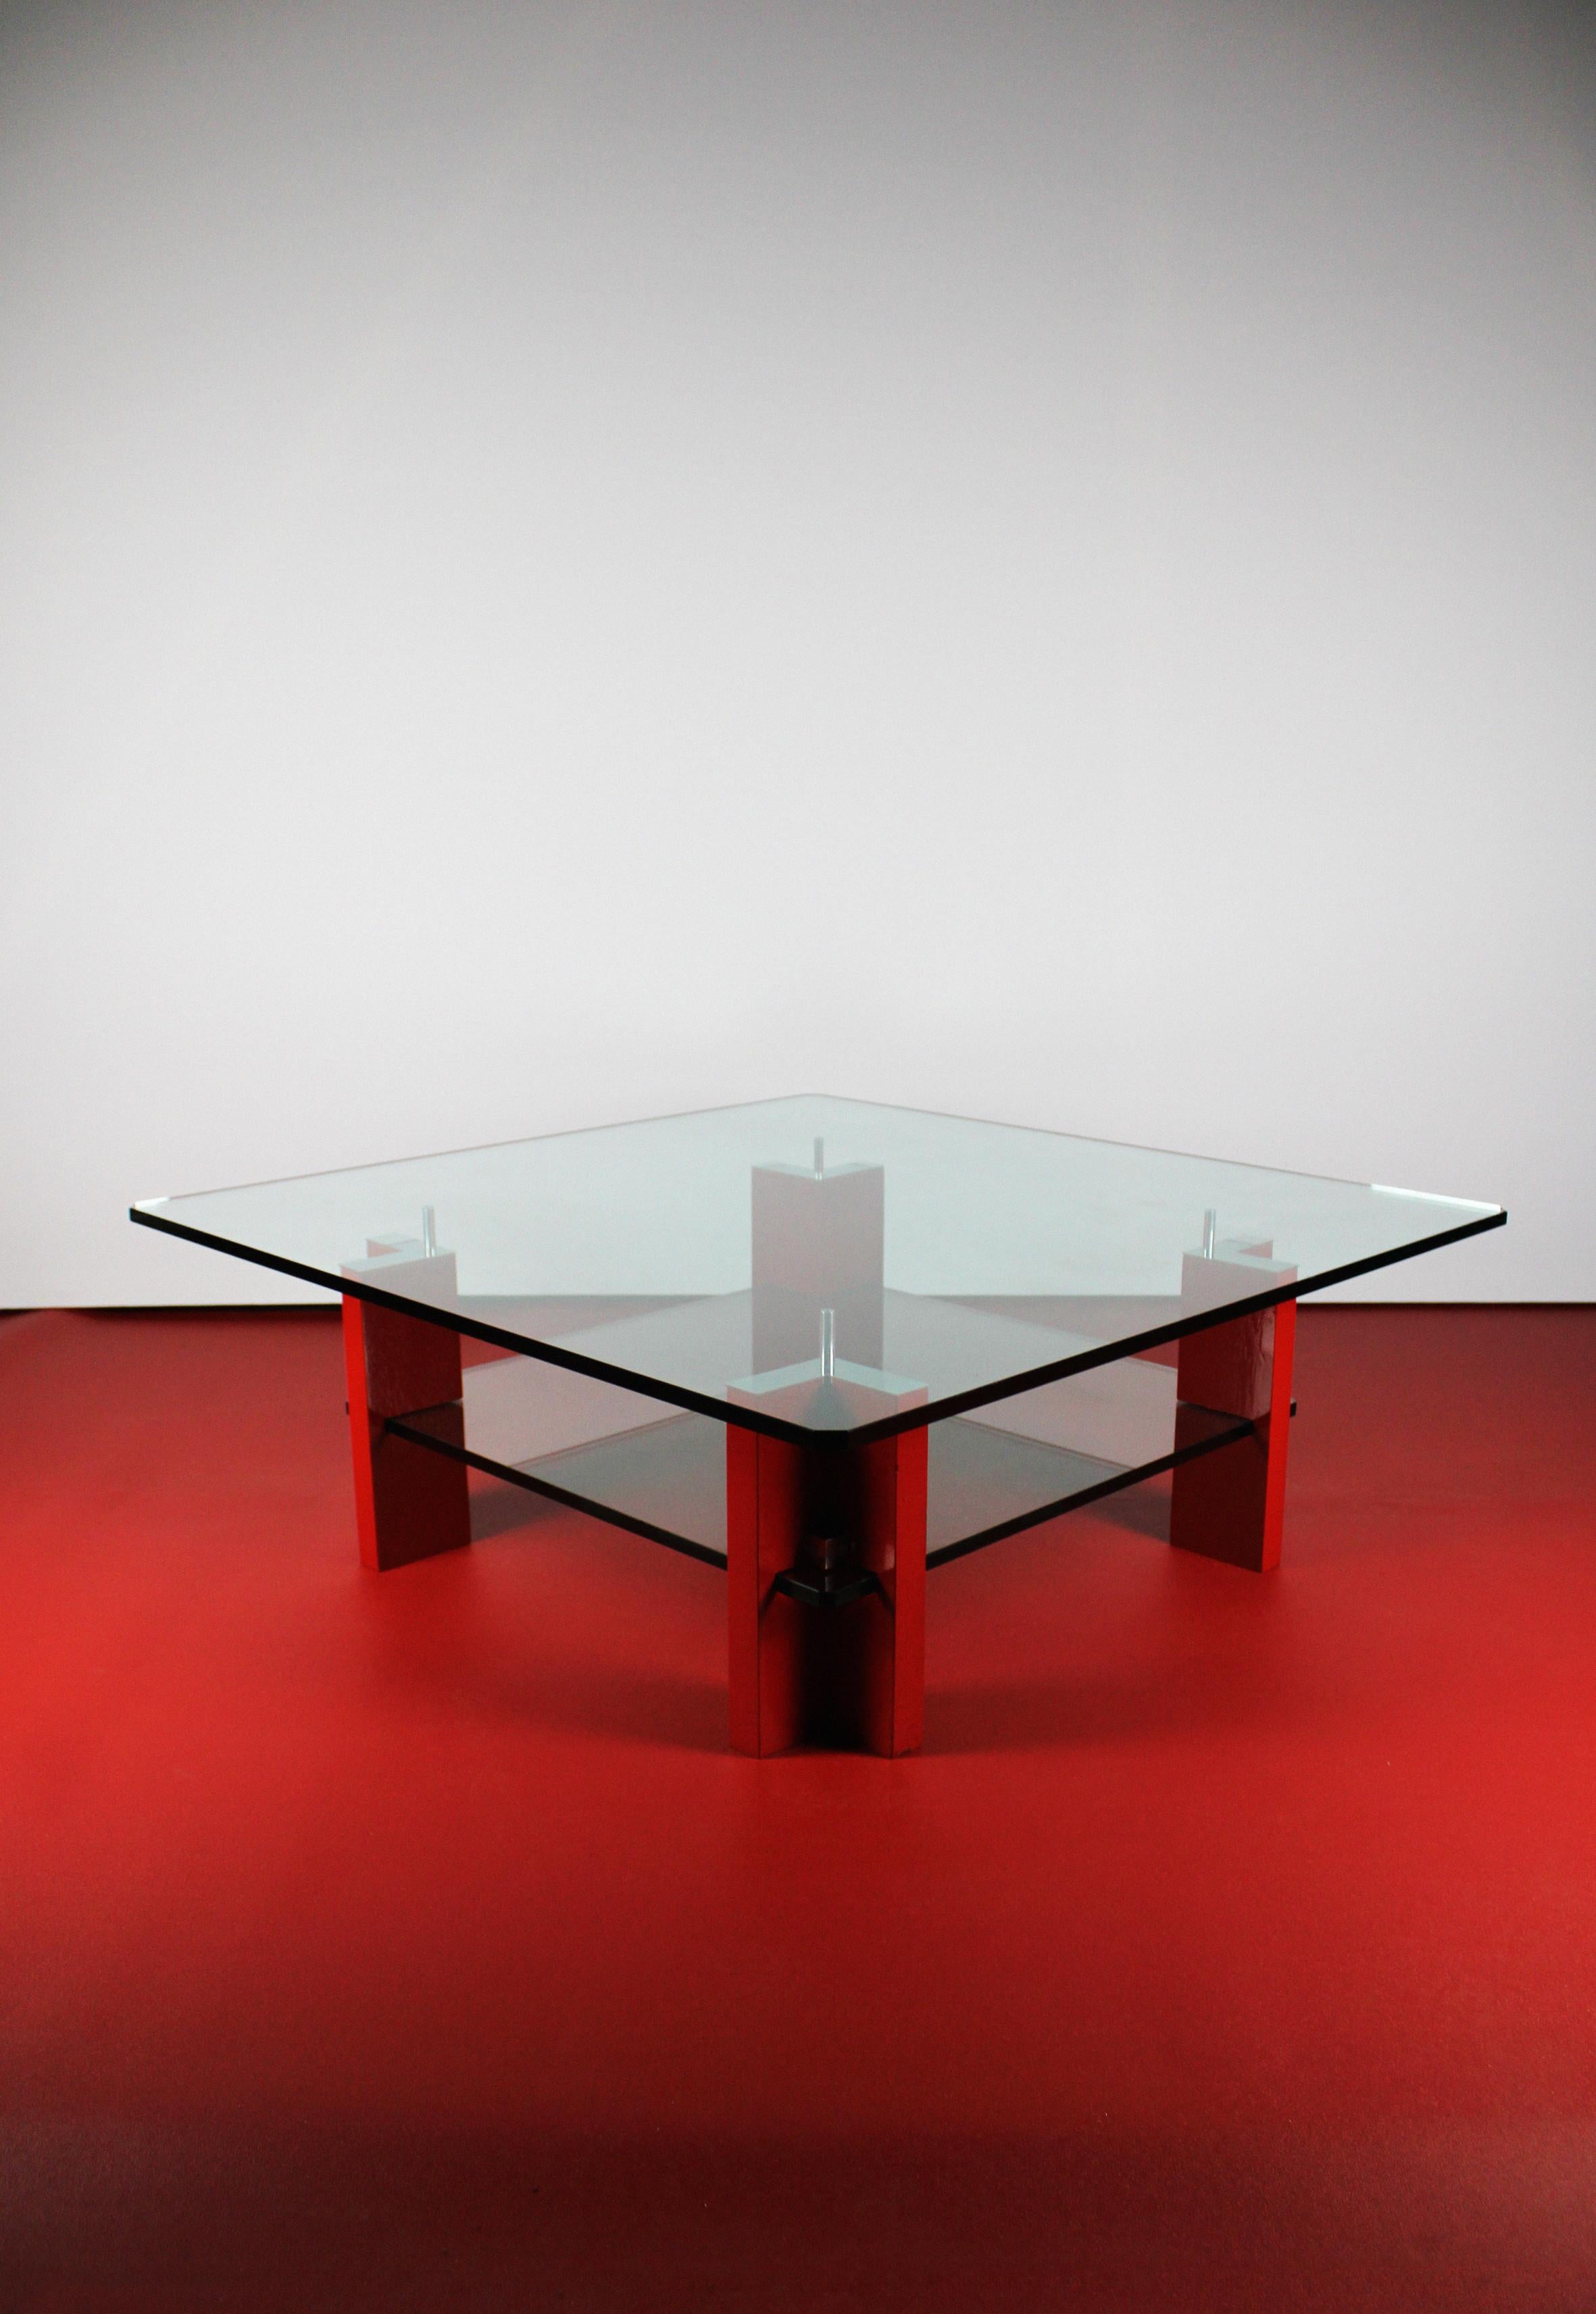 Presenting the Peter Ghyczy T 57 D, a distinctive modern coffee table that stands as a rare creation with only a few versions in existence. The timeless aesthetic is achieved through the unique combination of smoked glass and vibrant red wood legs.